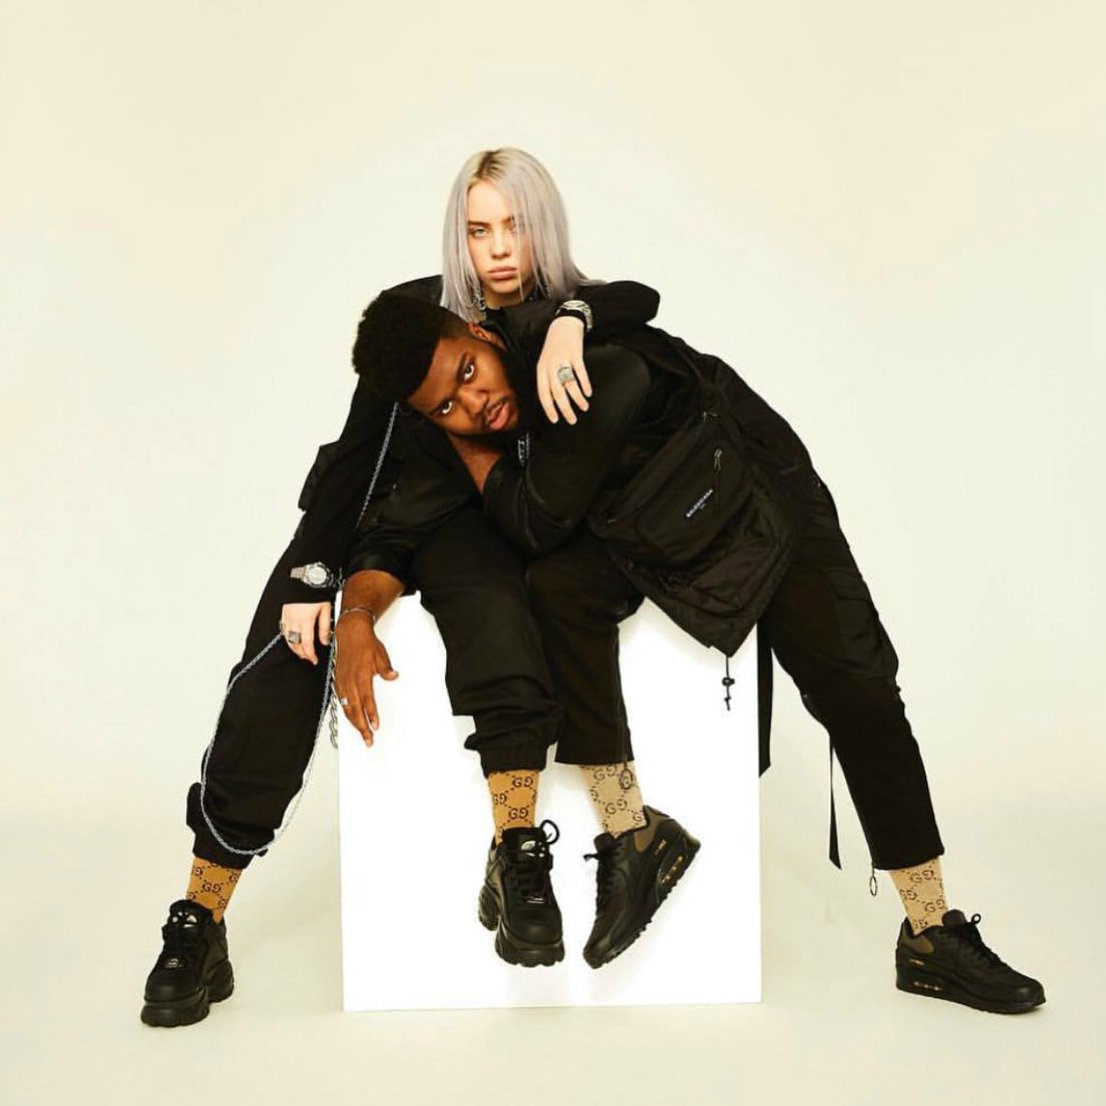 Lovely (Billie Eilish and Khalid song) - Wikipedia